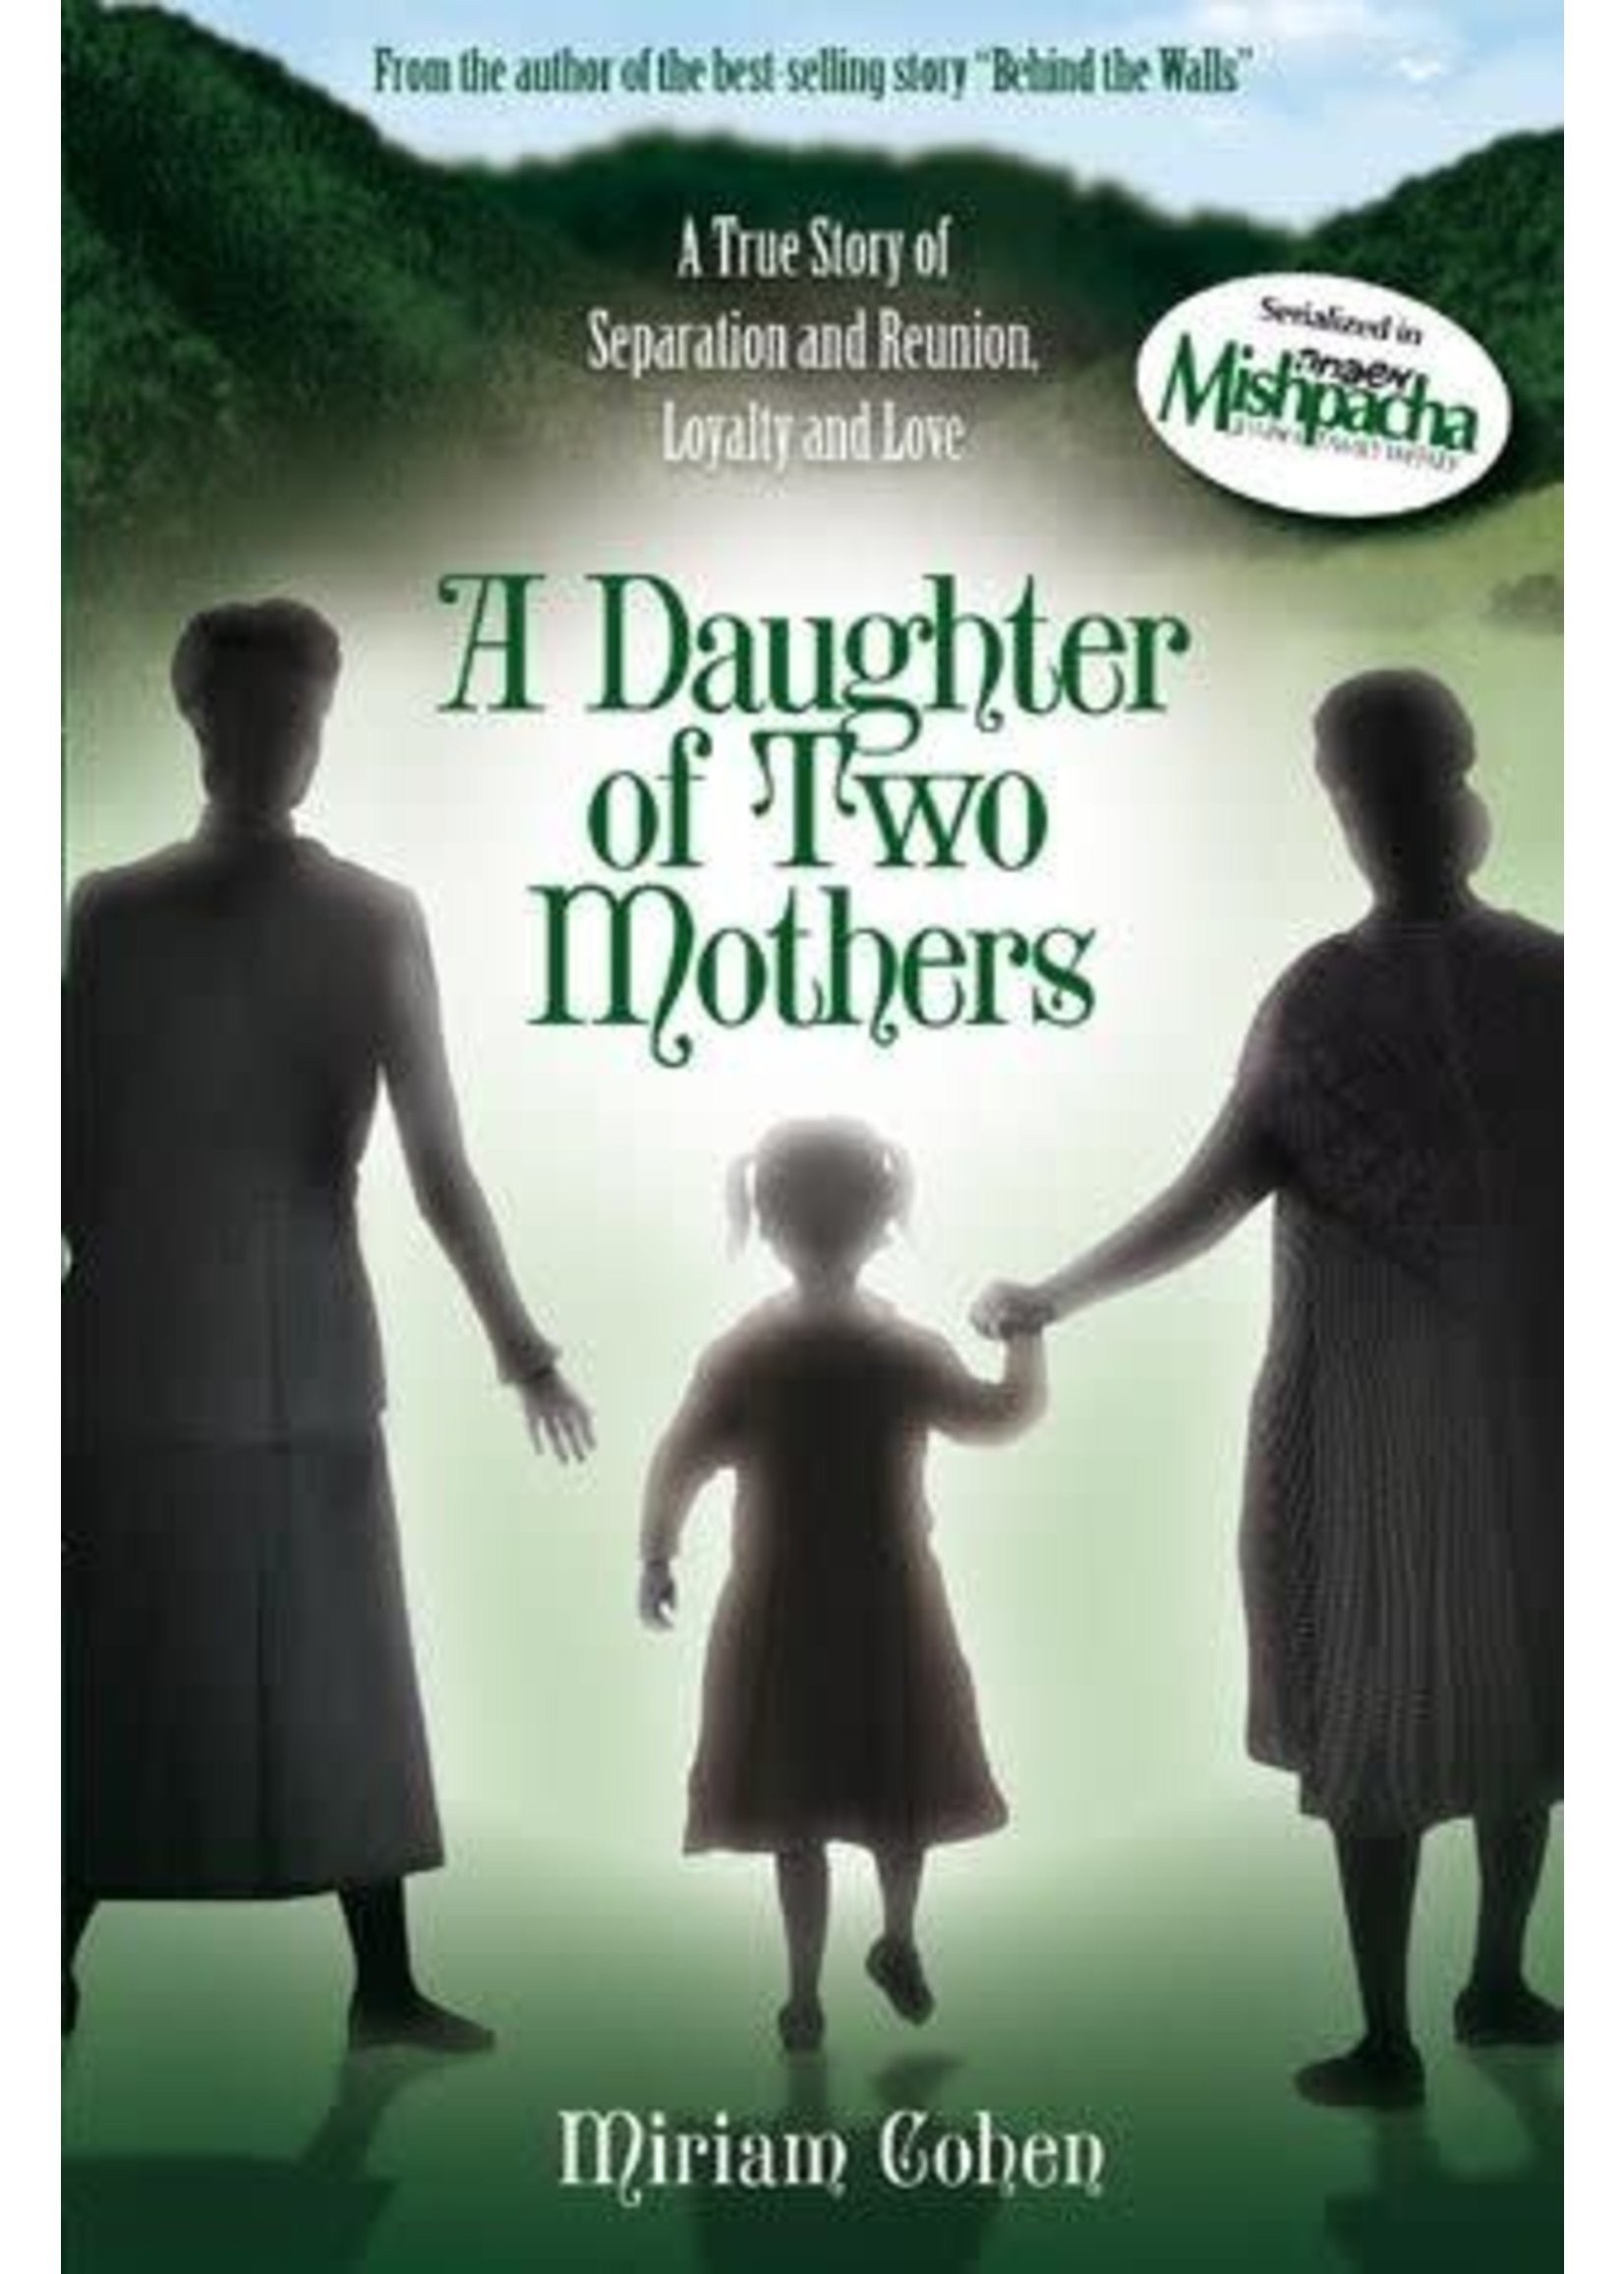 A DAUGHTER OF TWO MOTHERS